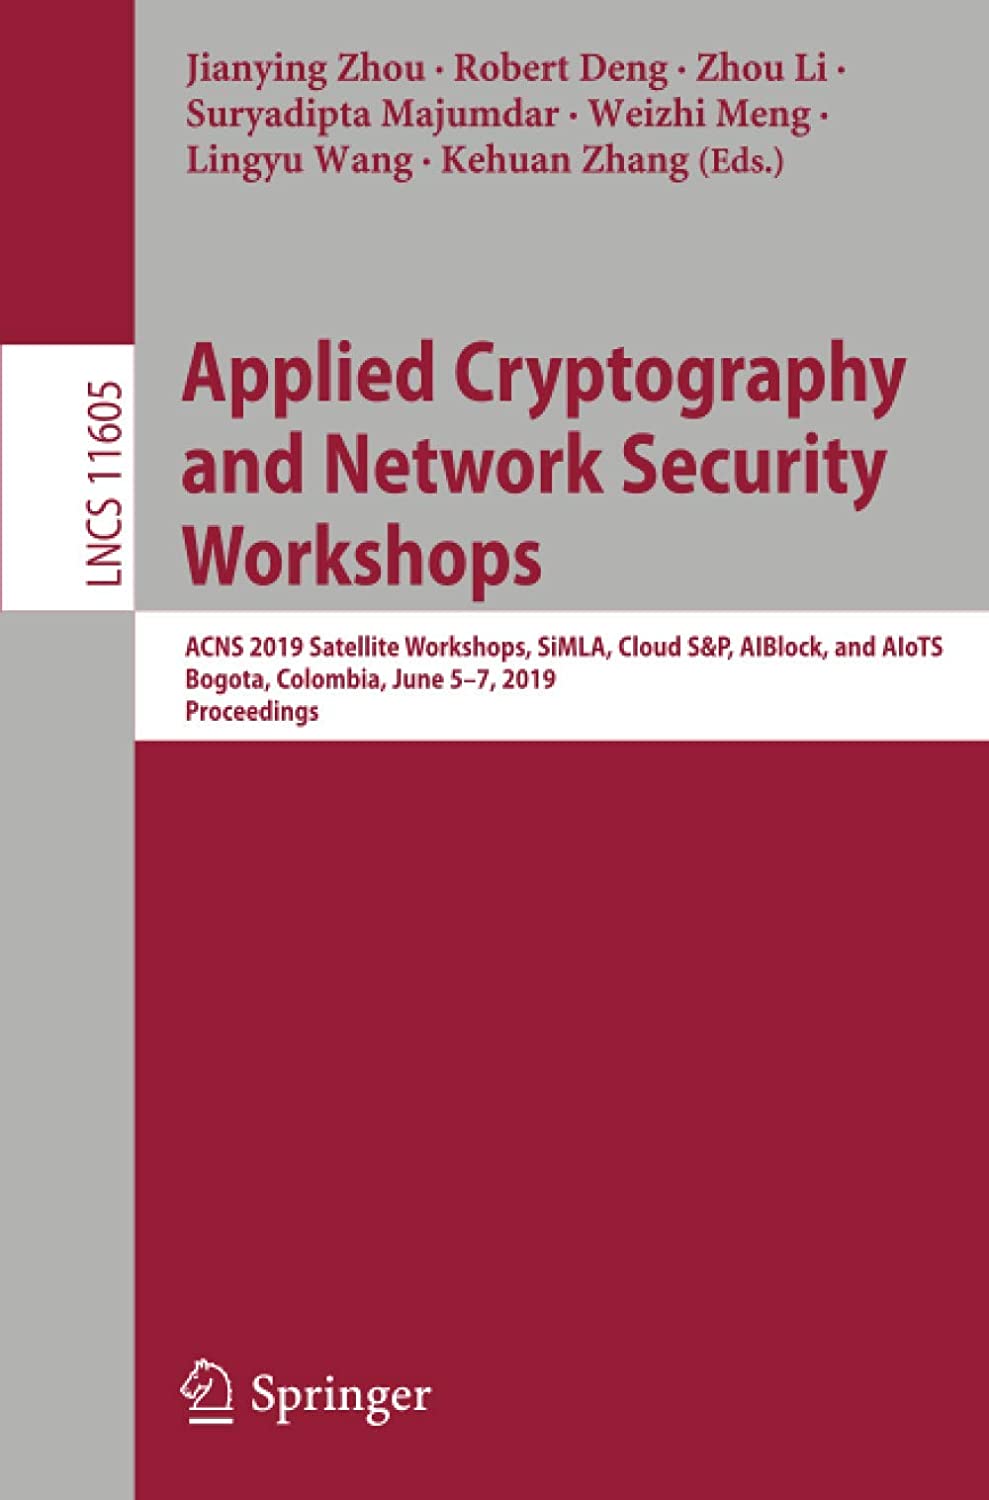 Applied cryptography and network security workshops : ACNS 2019 Satellite Workshops, SiMLA, Cloud S&P, AIBlock, and AIoTS, Bogota, Colombia, June 5-7, 2019, proceedings